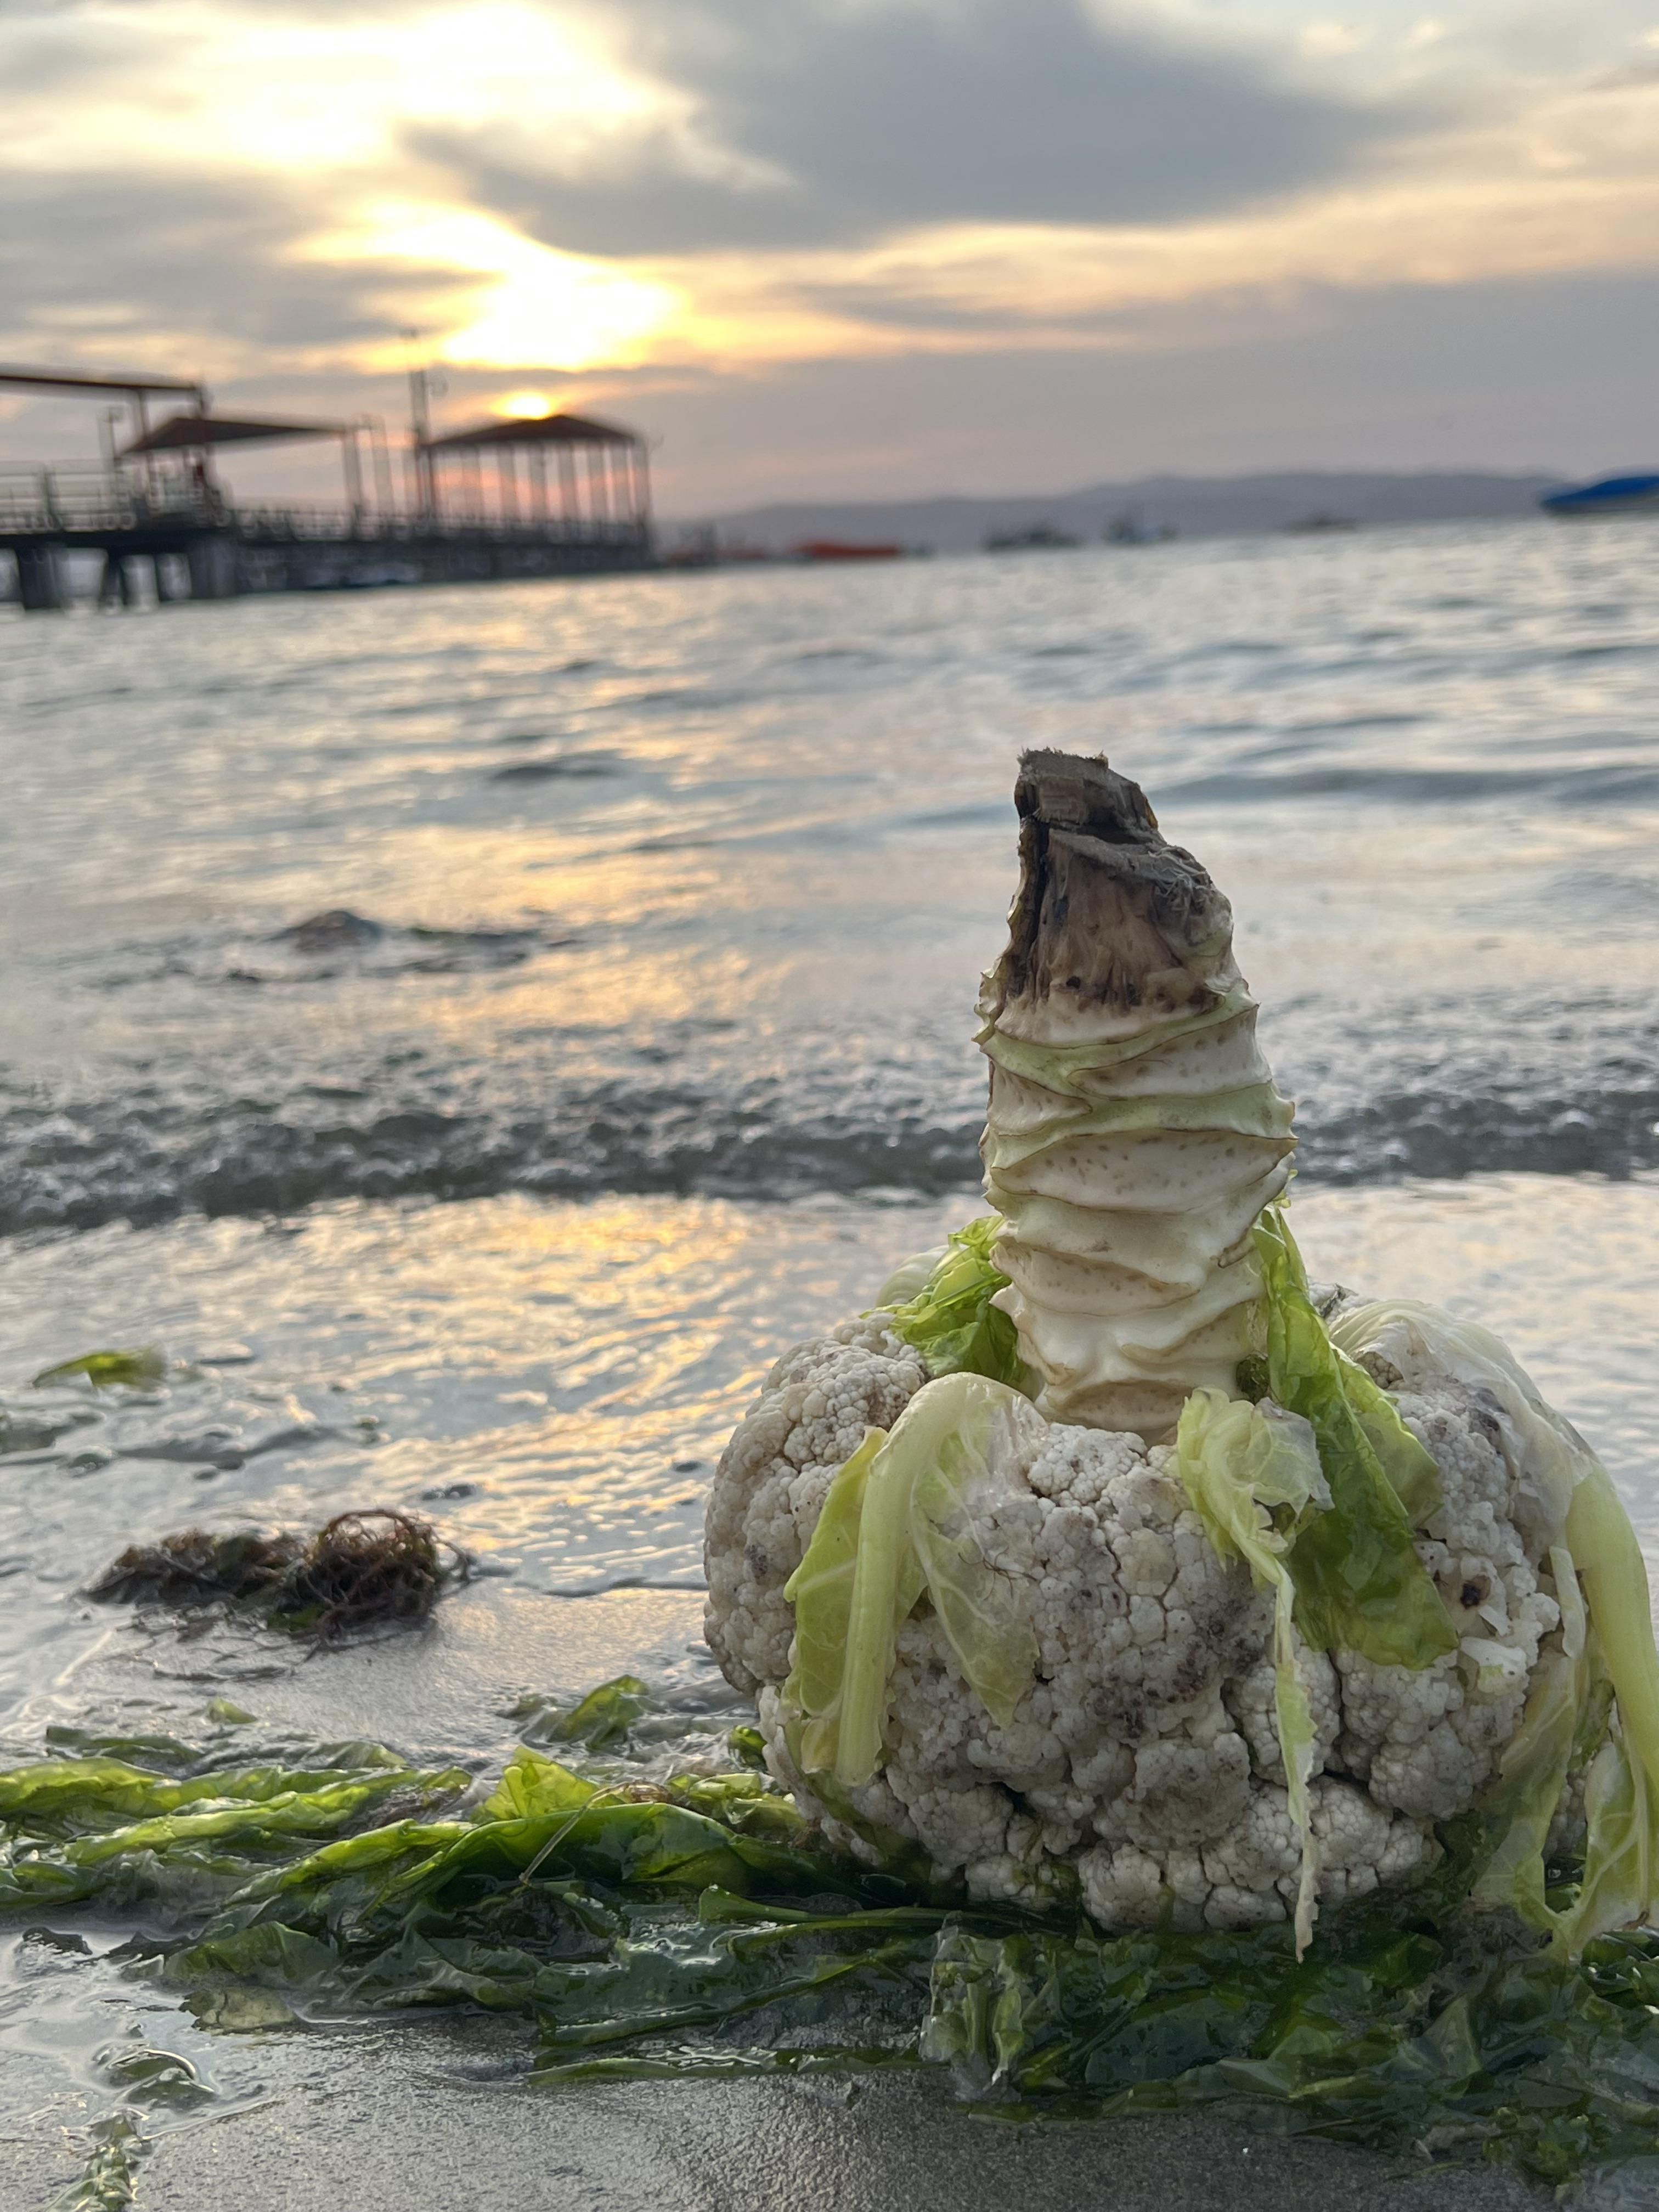 Did someone lose their cauliflower in the Pacific?